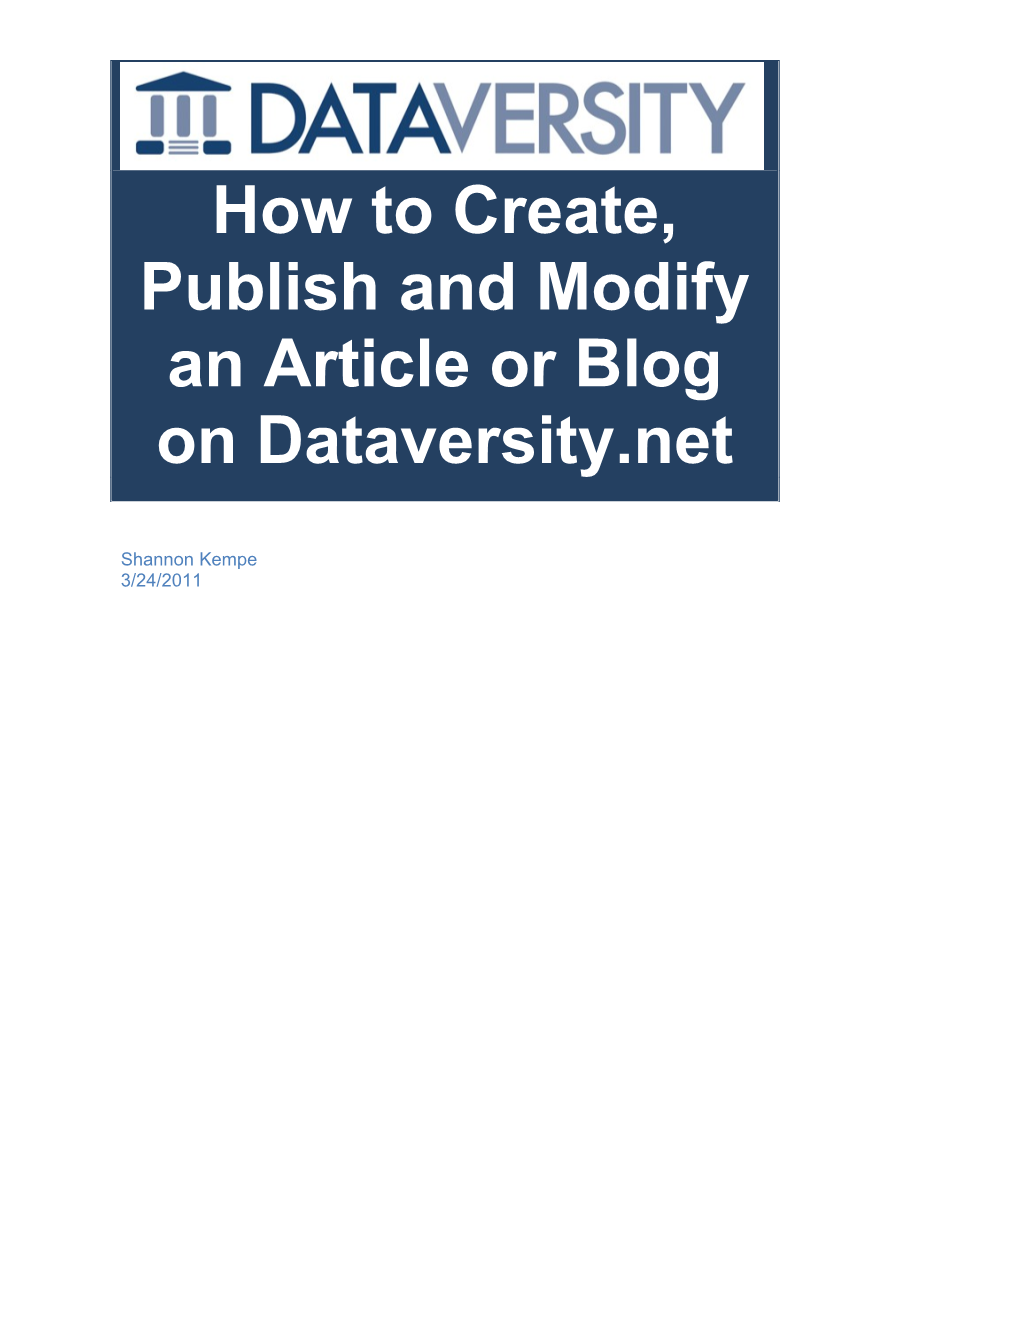 How to Create, Publish and Modify an Article Or Blog on Dataversity.Net